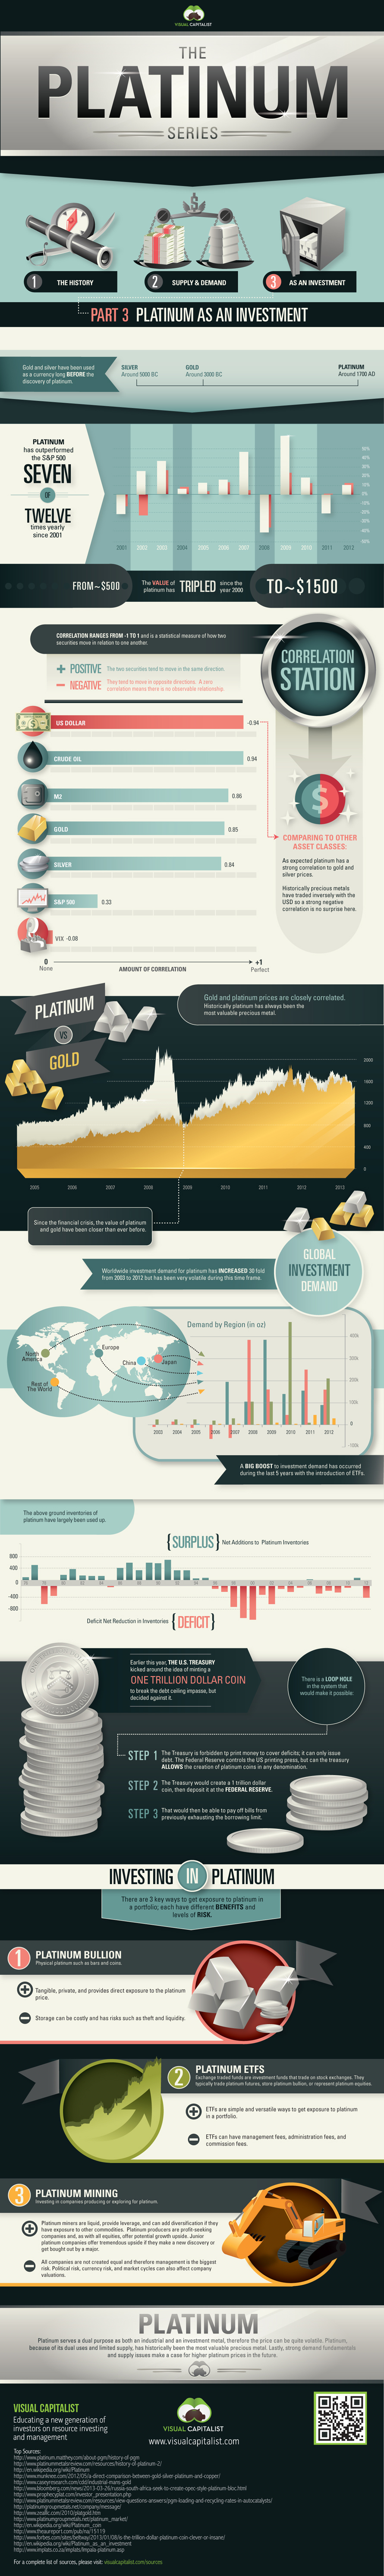 platinum-as-an-investment-infographic.jpg